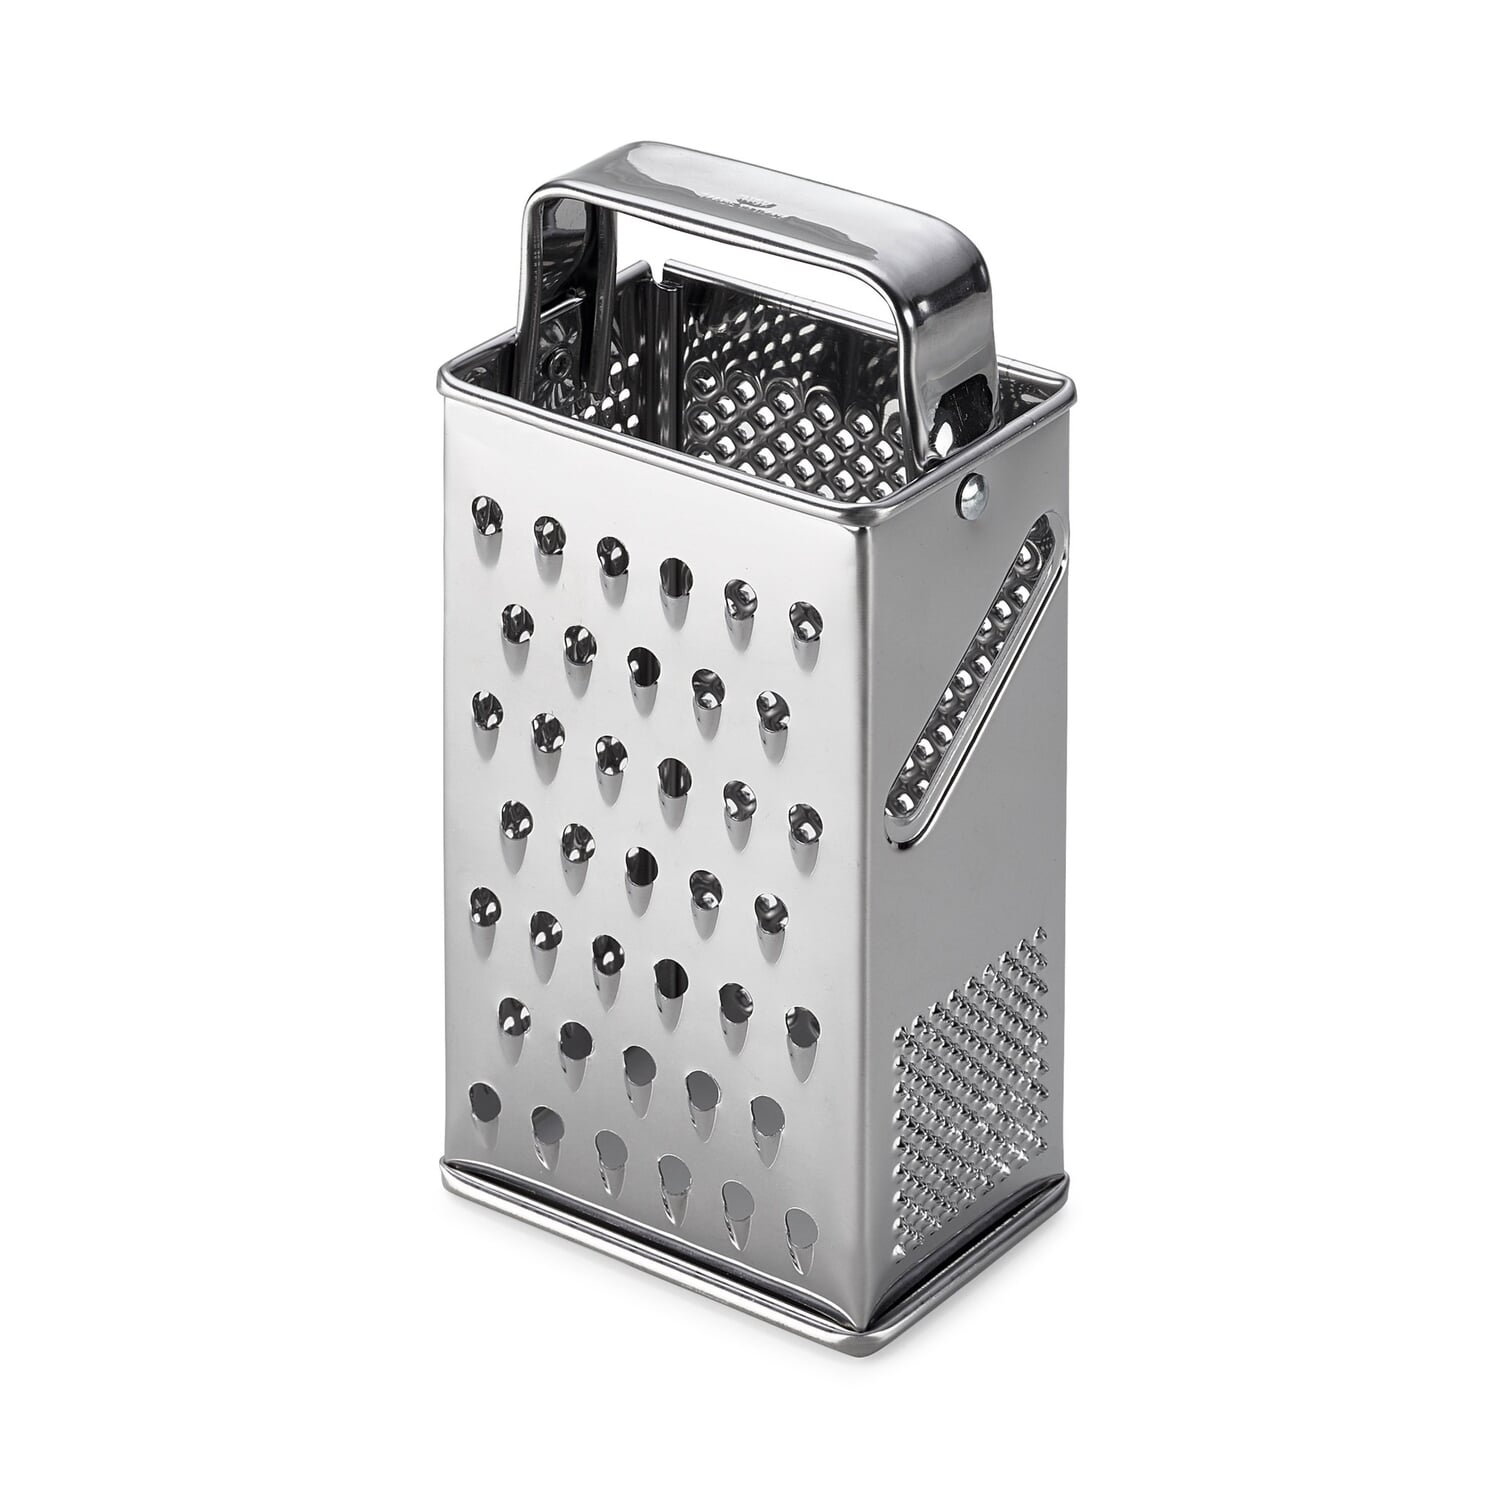 equipment - What is a German potato grater called? - Seasoned Advice